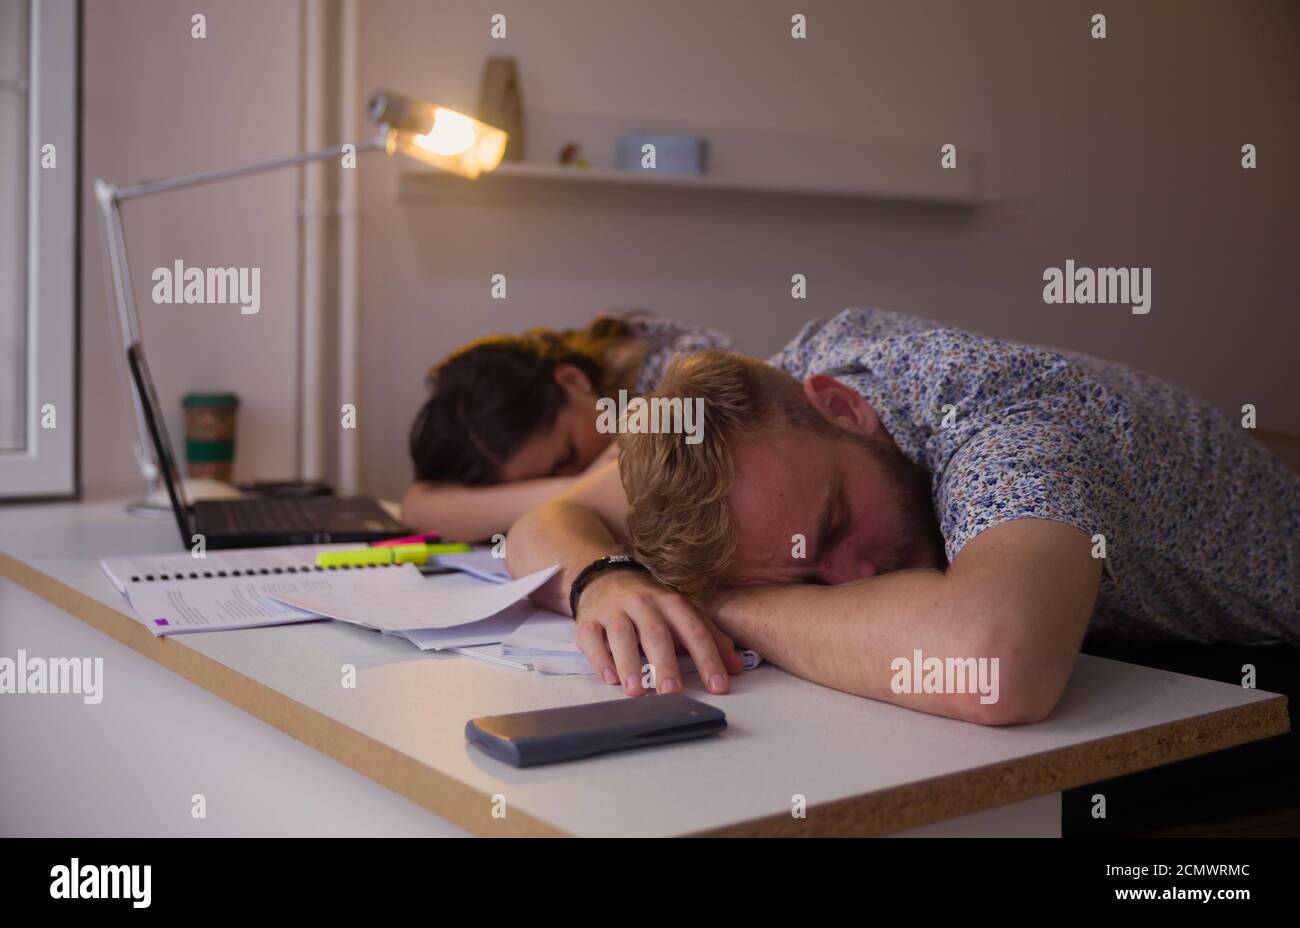 two students or coworkers, sleeping on table, exhausted from studying. Stock Photo